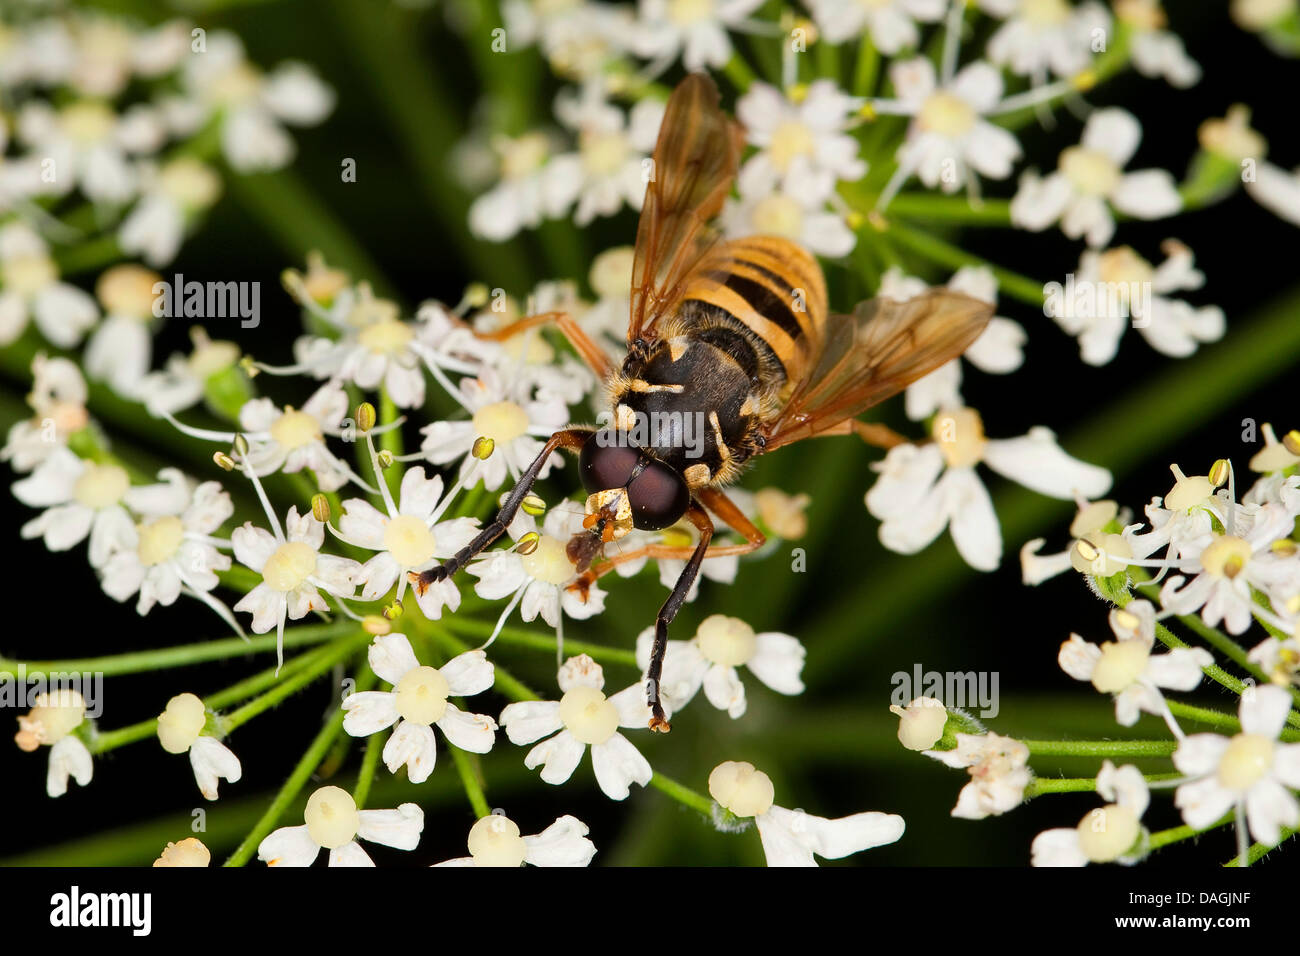 Hover fly (Temnostoma vespiforme), on flowers of an umbellifer, Germany Stock Photo